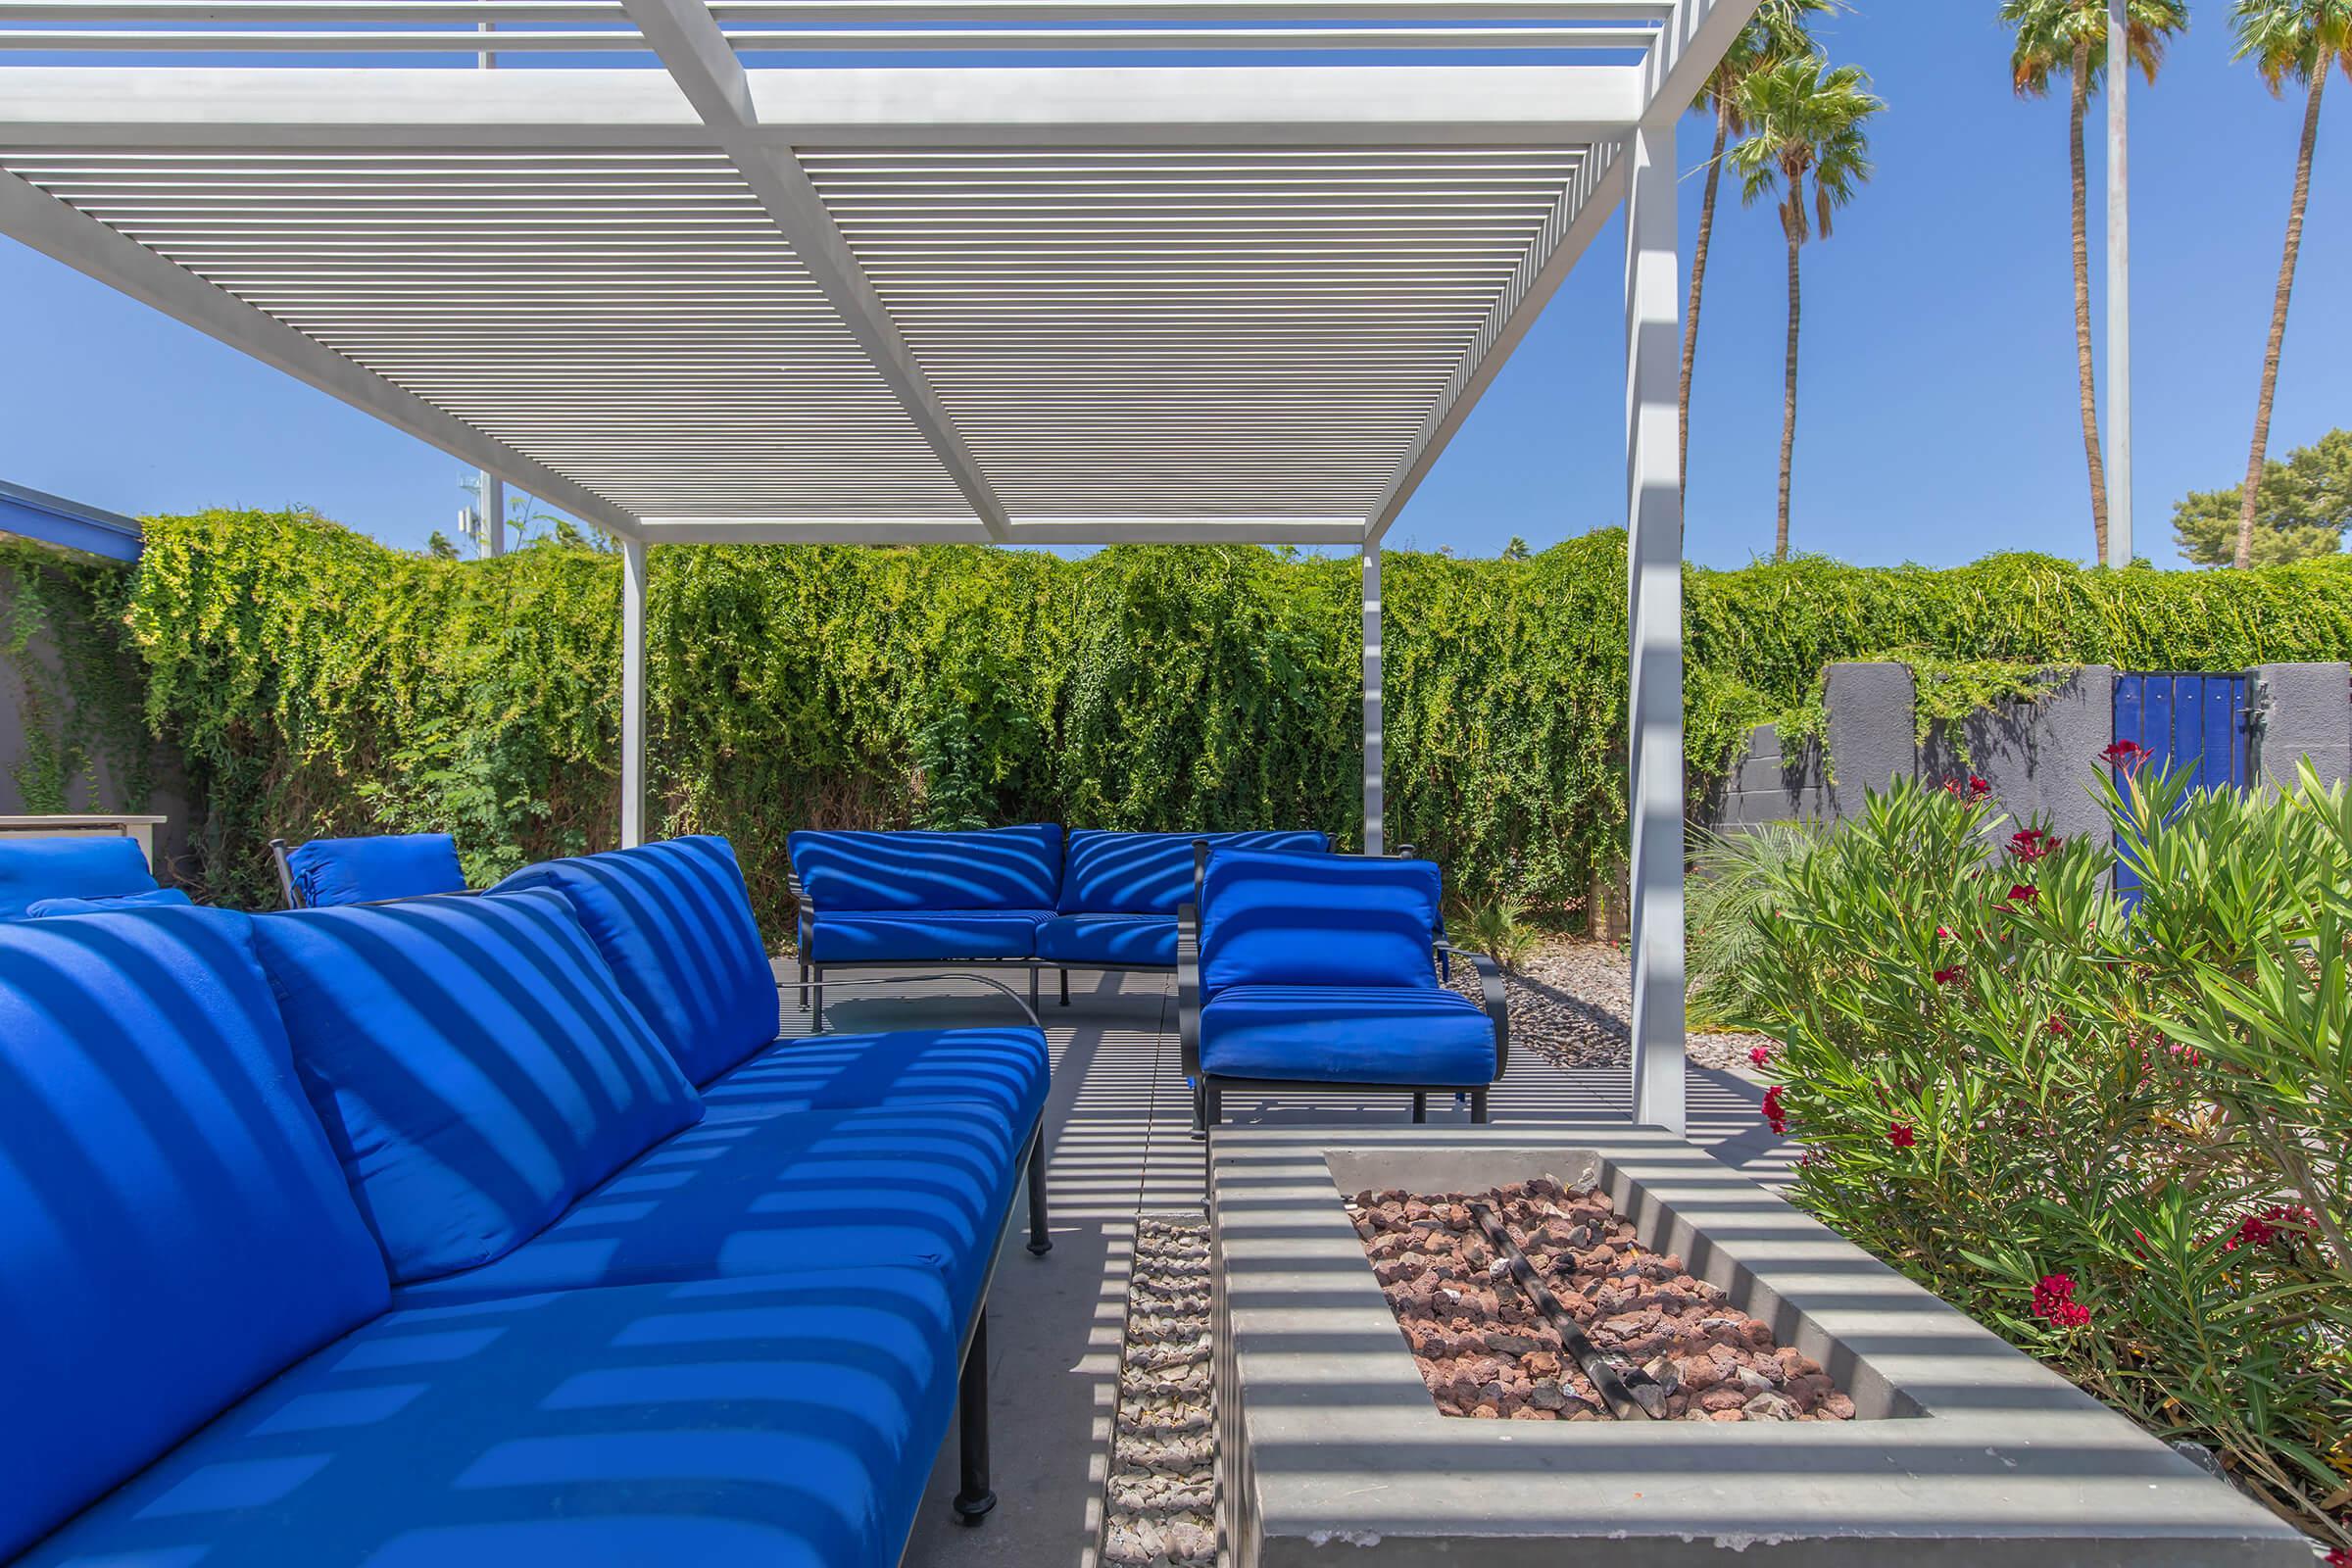 Outdoor patio area with blue lounge couch seating around an electric fire pit at Rise Biltmore